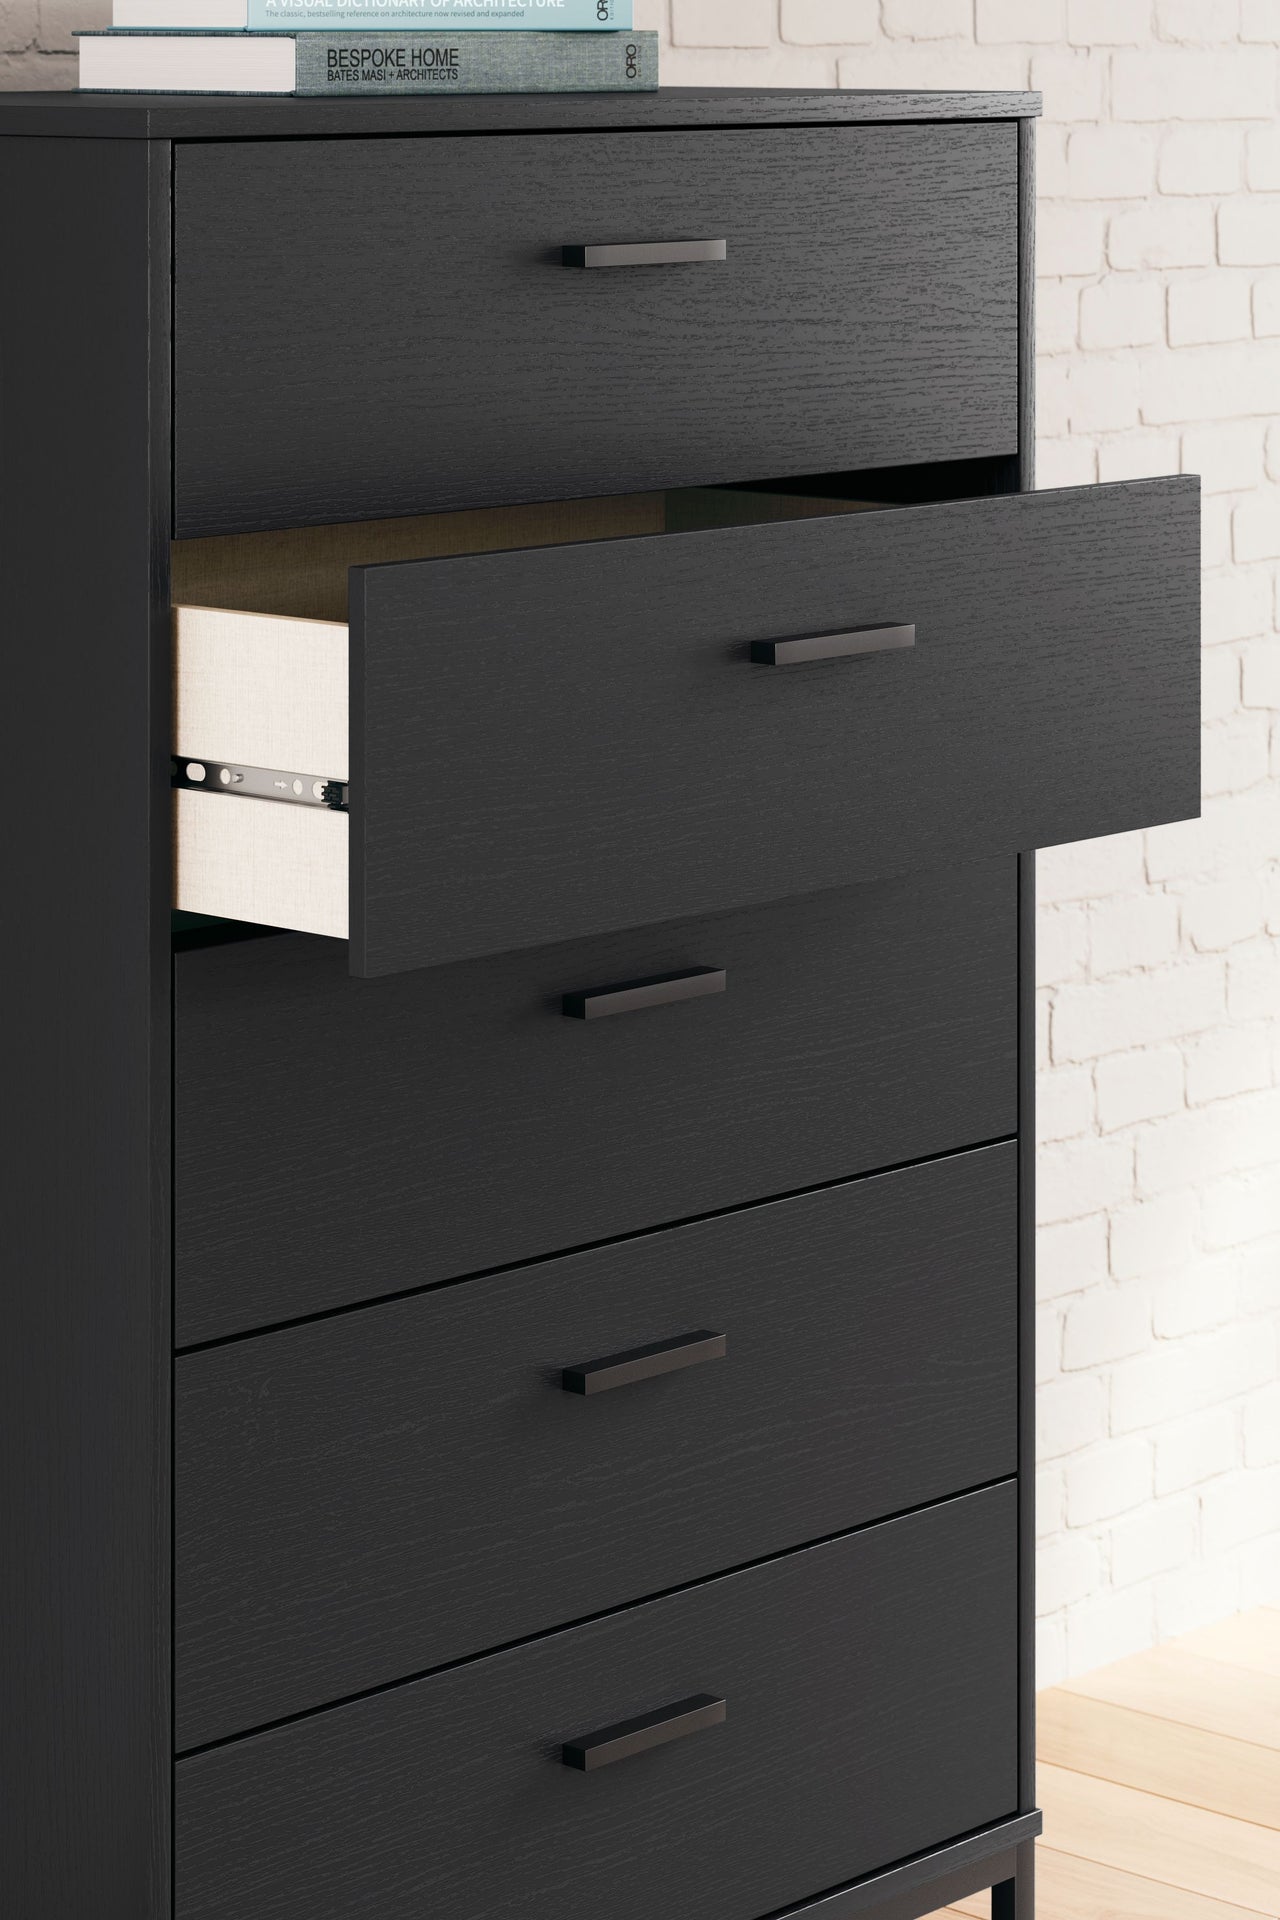 Socalle - Drawer Chest - Tony's Home Furnishings